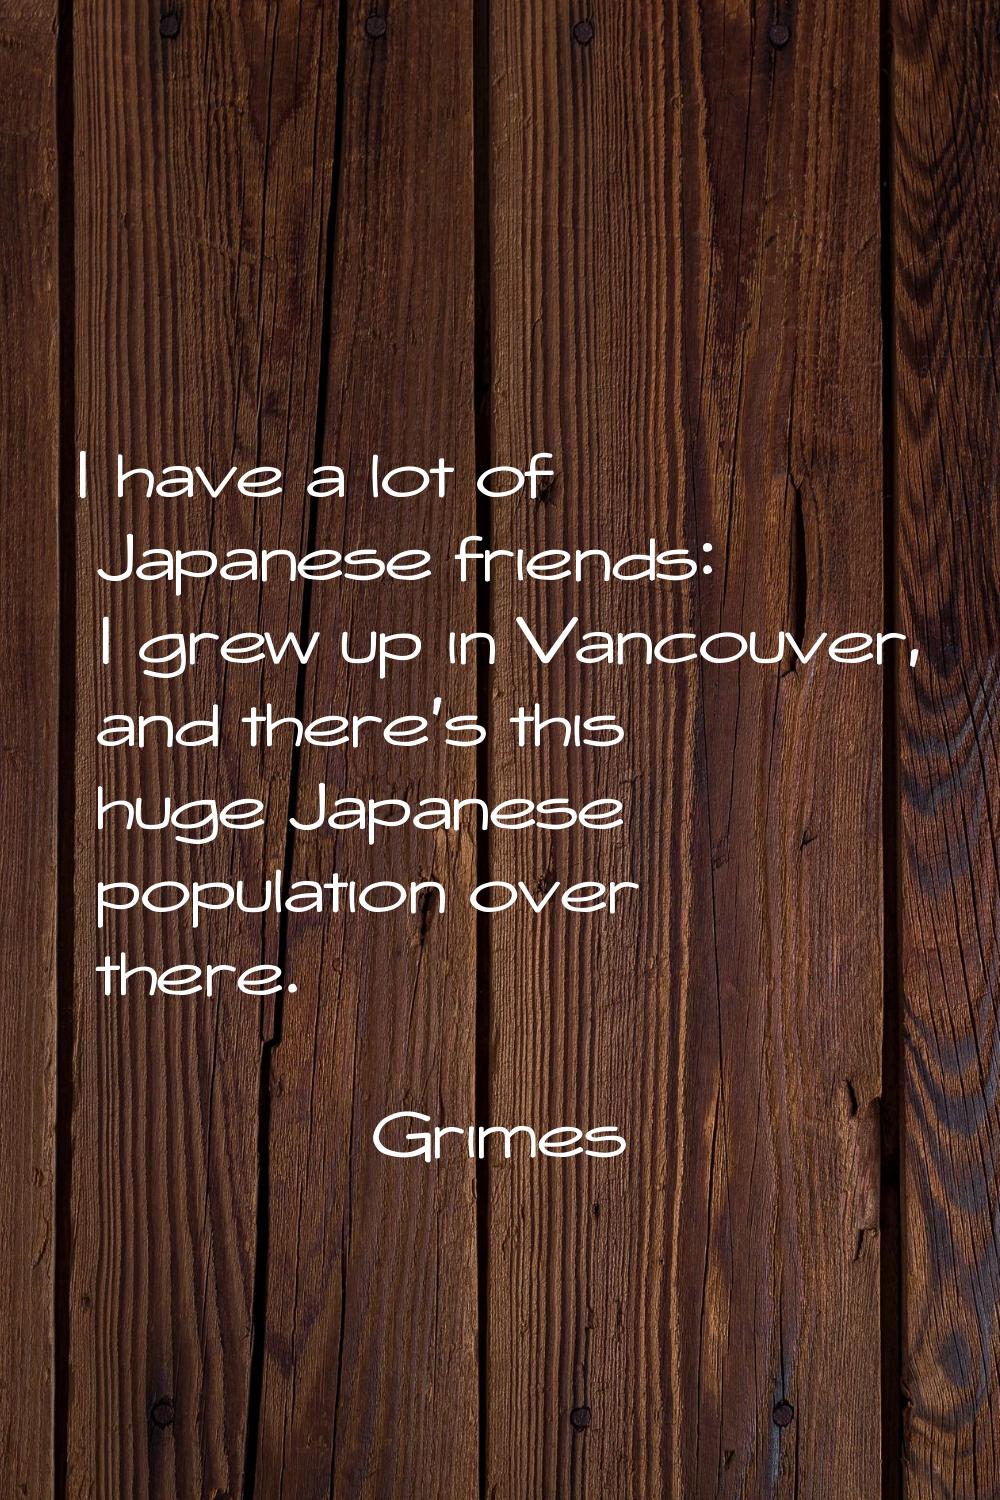 I have a lot of Japanese friends: I grew up in Vancouver, and there's this huge Japanese population